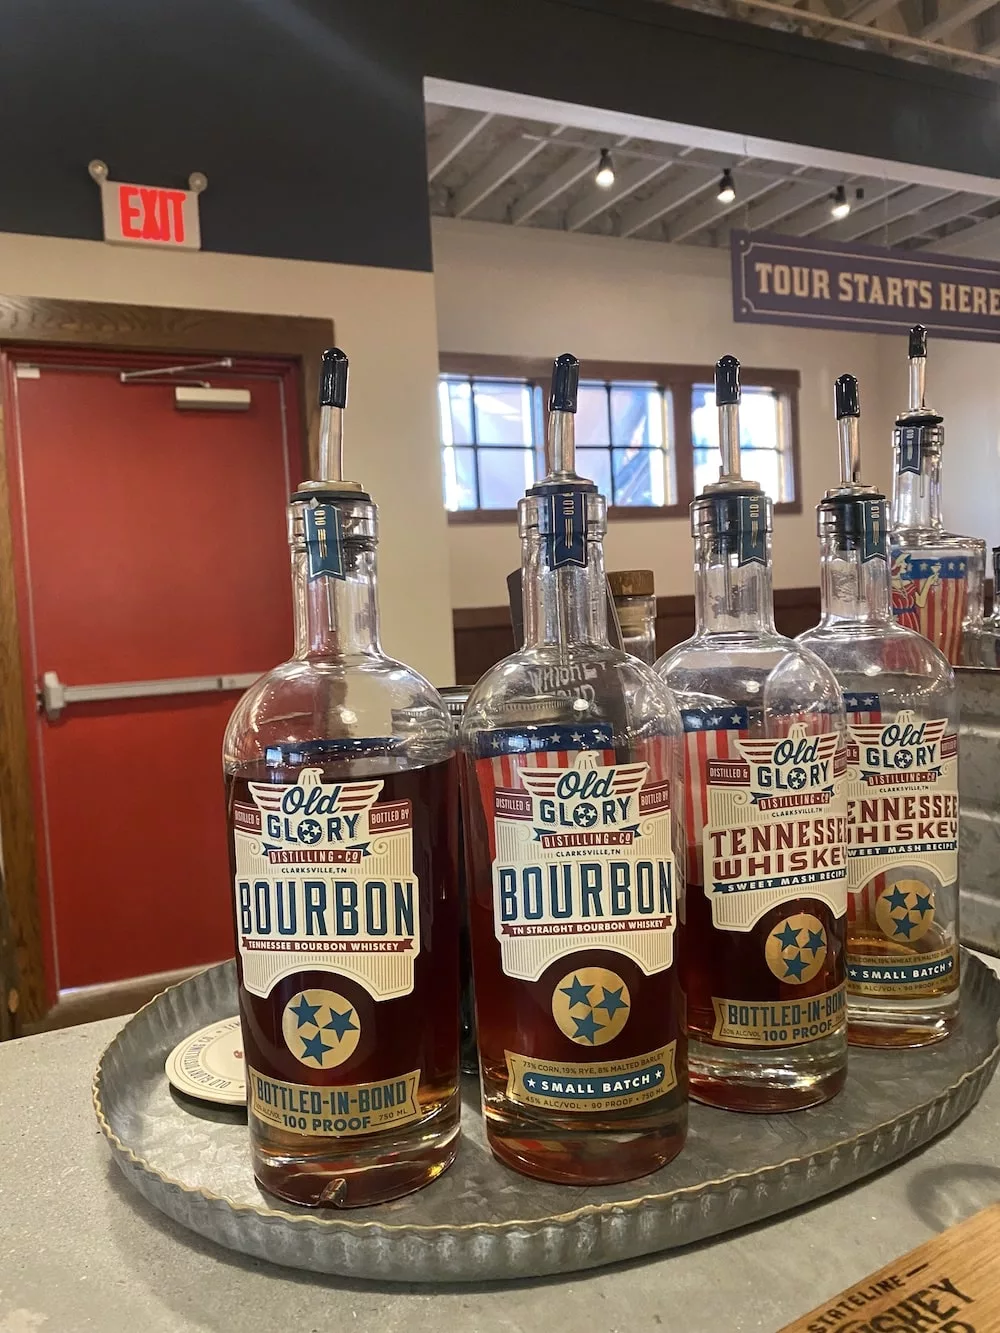 Sampling bottles at Old Glory Distilling Co. in Clarksville, Tennessee